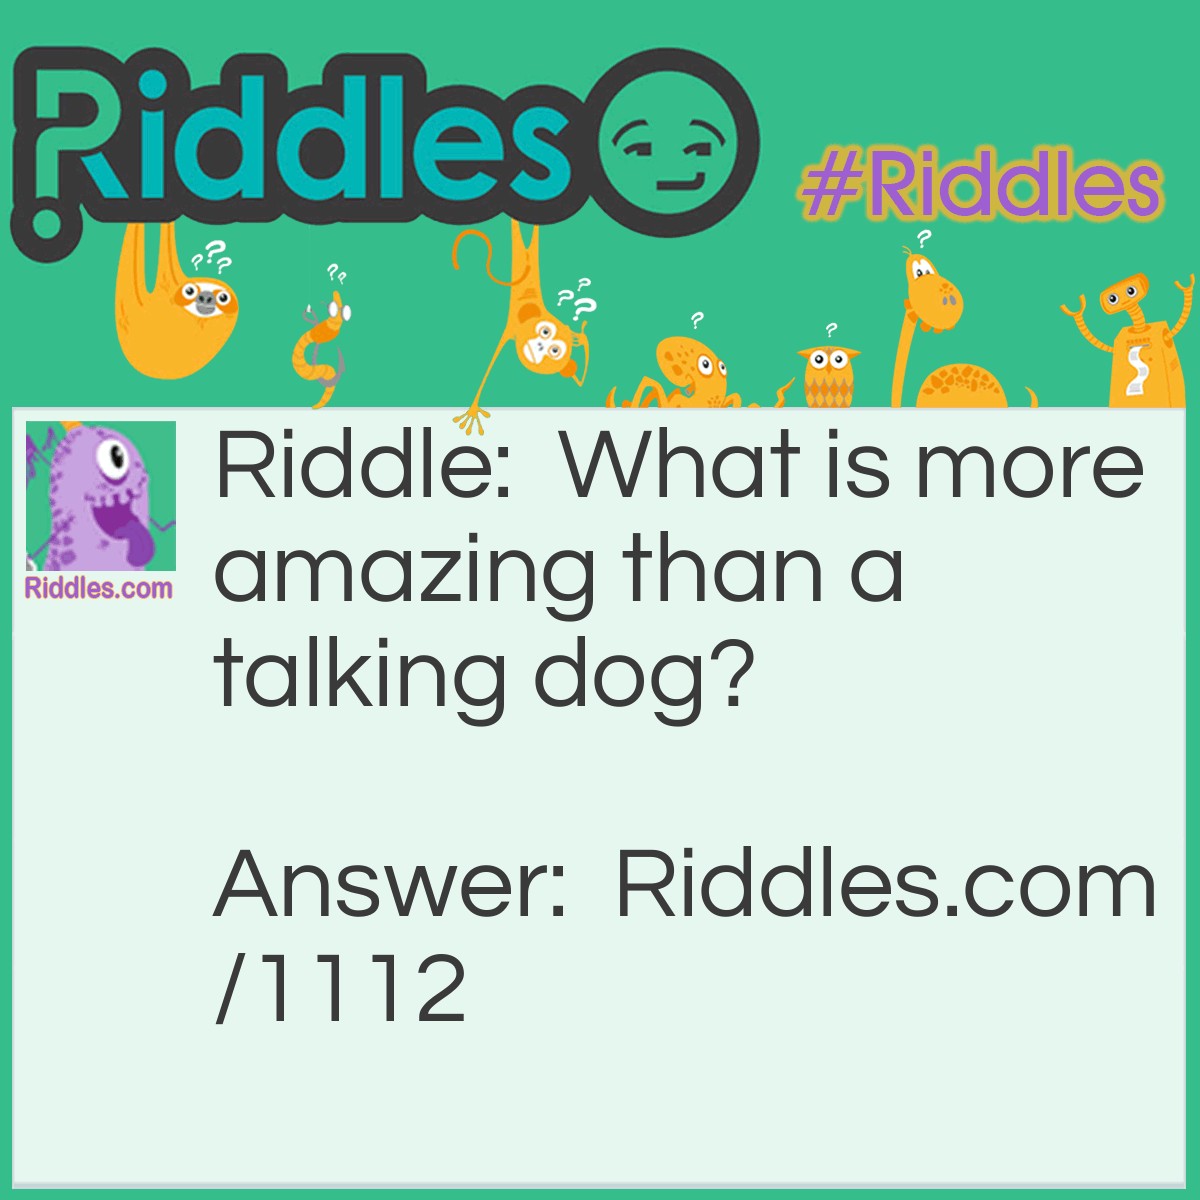 Riddle: What is more amazing than a talking dog? Answer: A spelling bee.